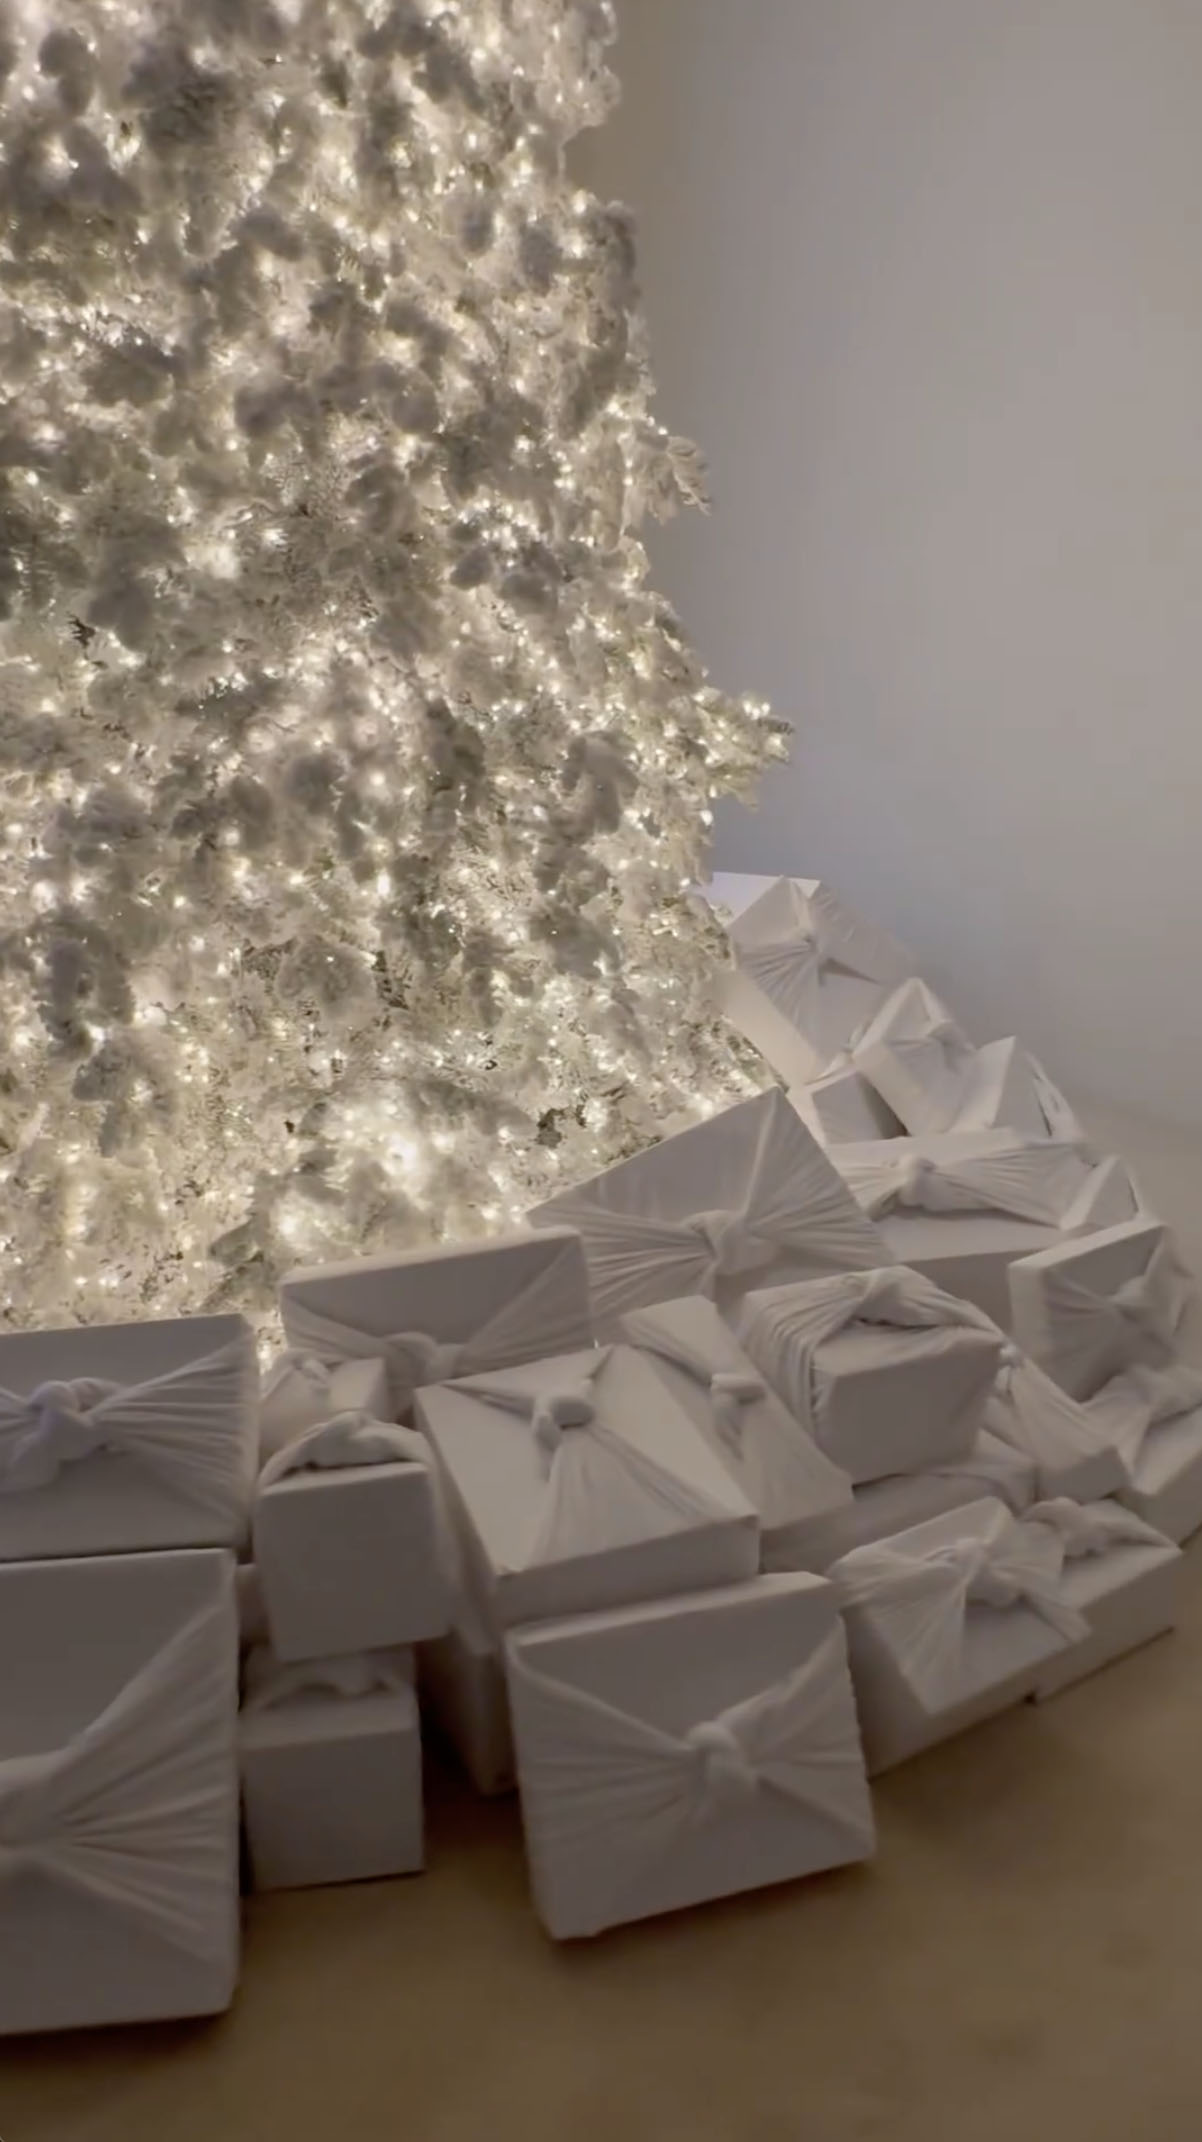 She posted a video of a pile of Christmas presents under her tree